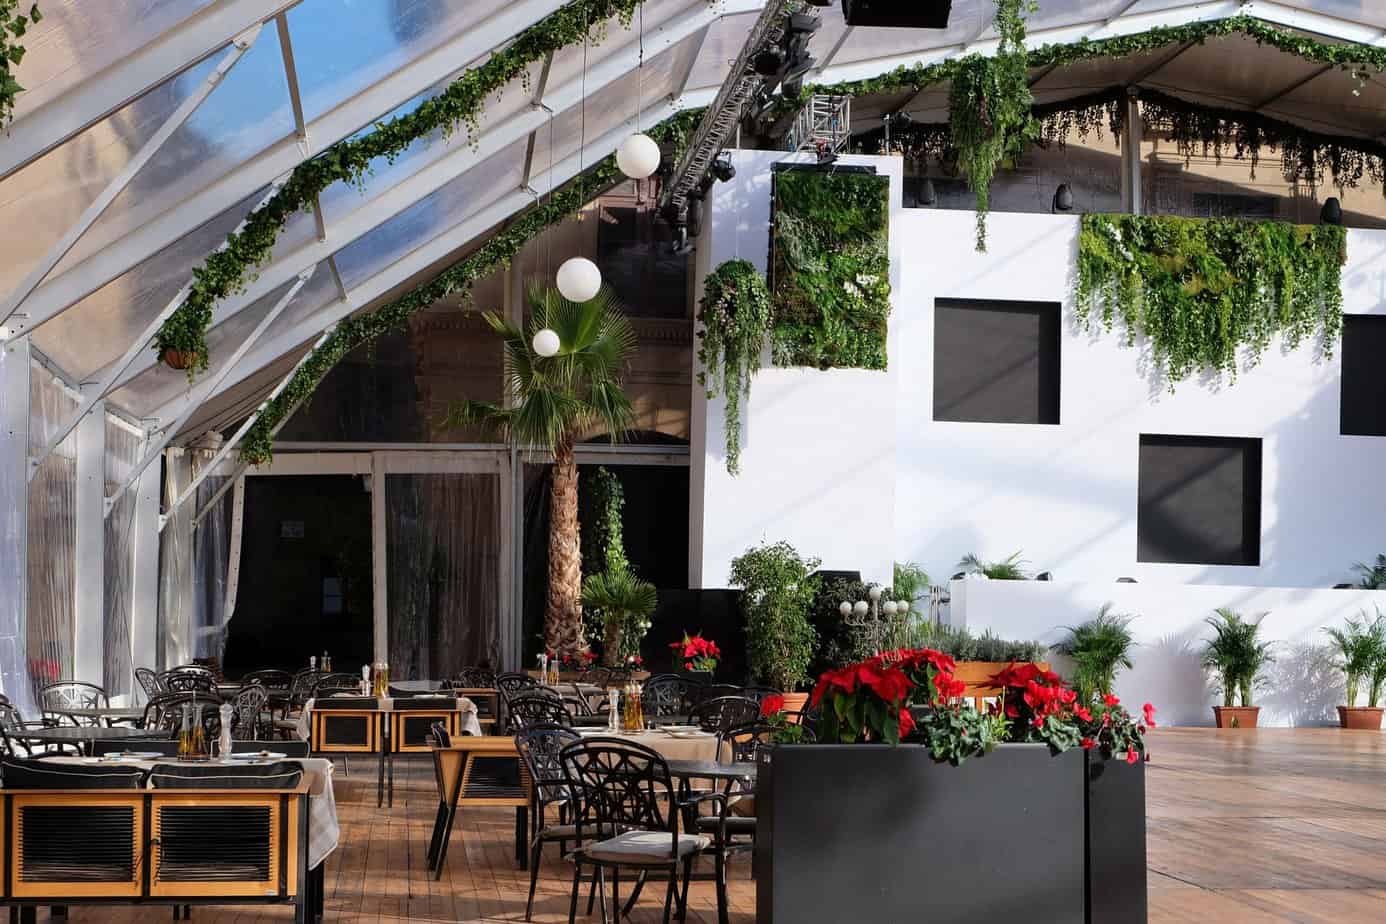 Covered Outdoor Event Space Barcelona